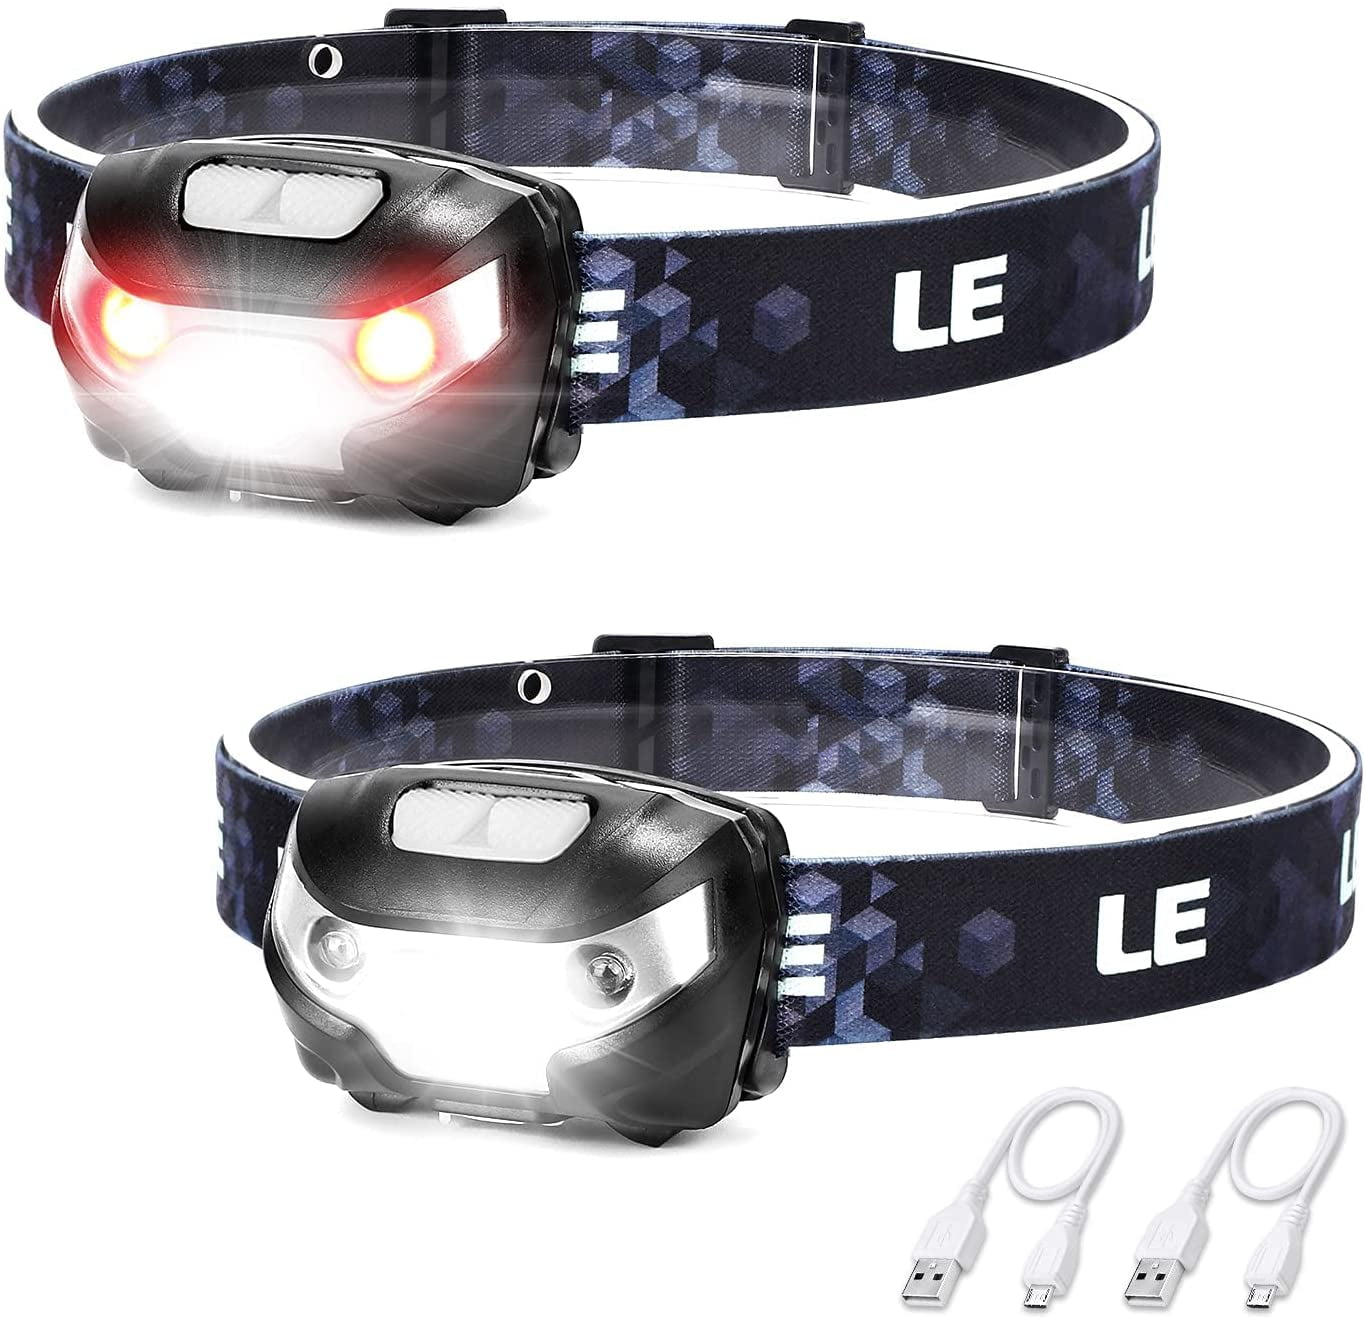 Aluminum Alloy 100000LM LED Headlamp IPX4 Waterproof Headlight, iMounTEK  Rechargeable LED Headlight for Adults, 90° Adjustable Lighting Modes Head  Light for Hiking Rescuing Camping